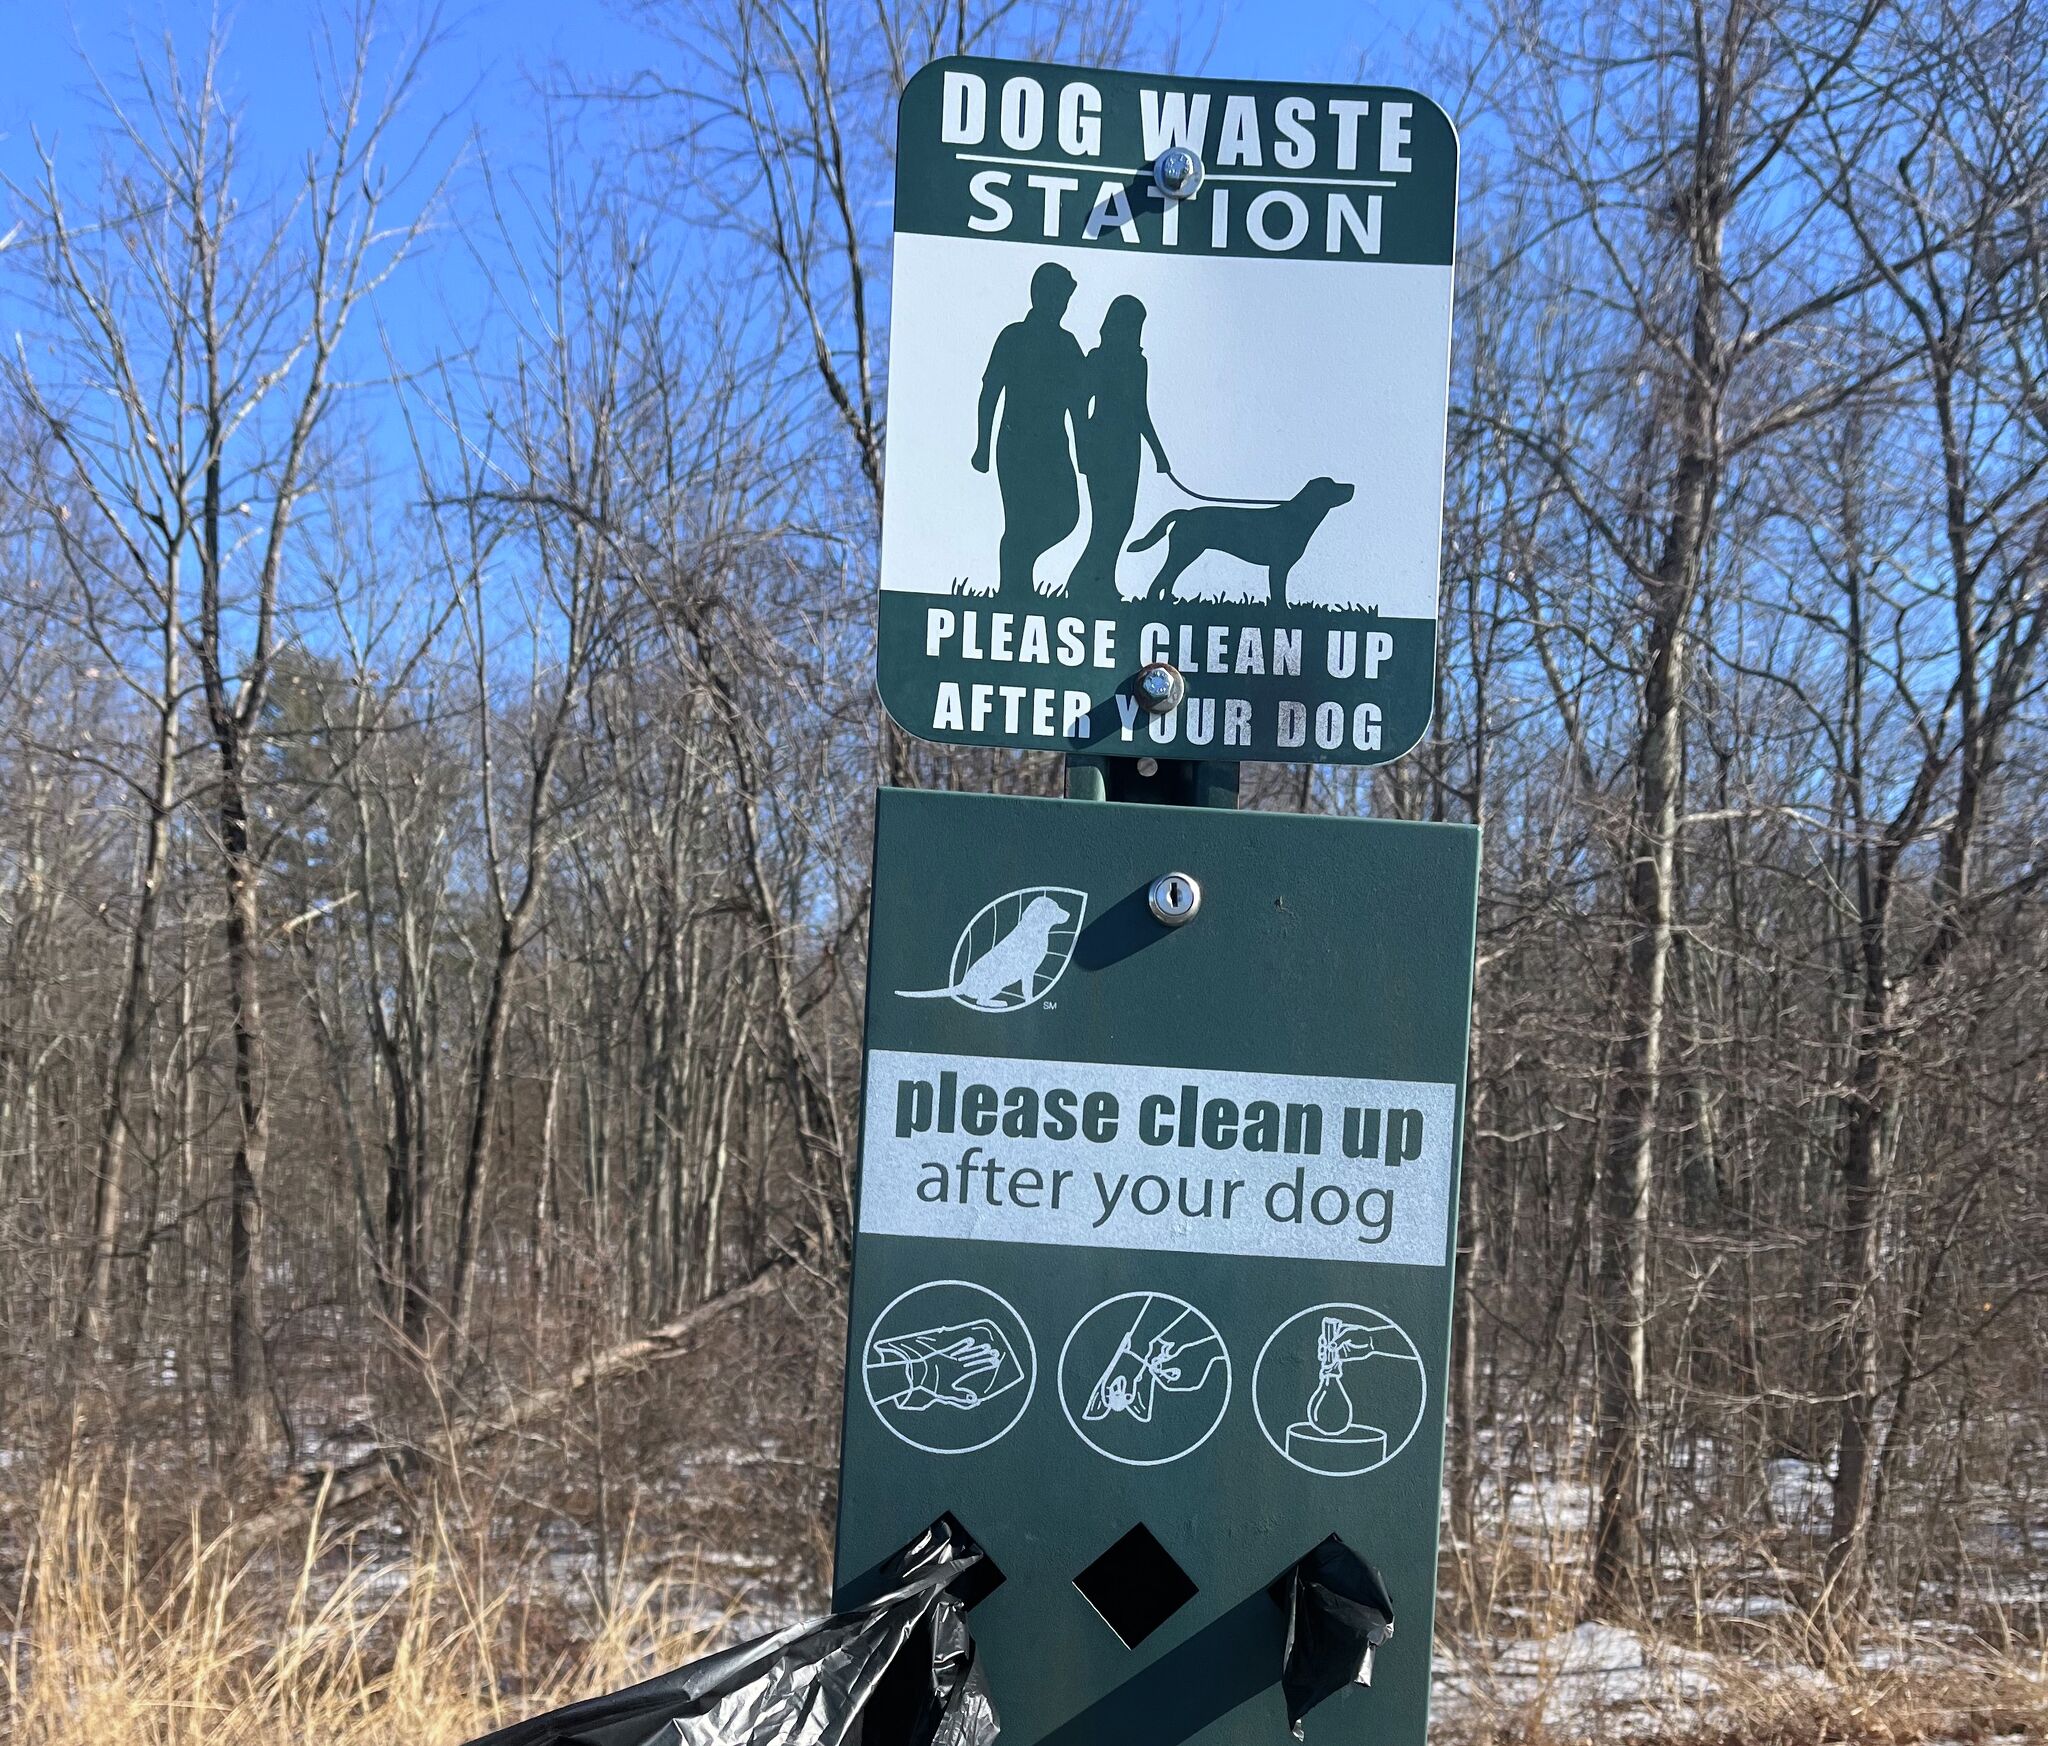 Yes, dog parks can be poop pastures, but are they unsafe? – The